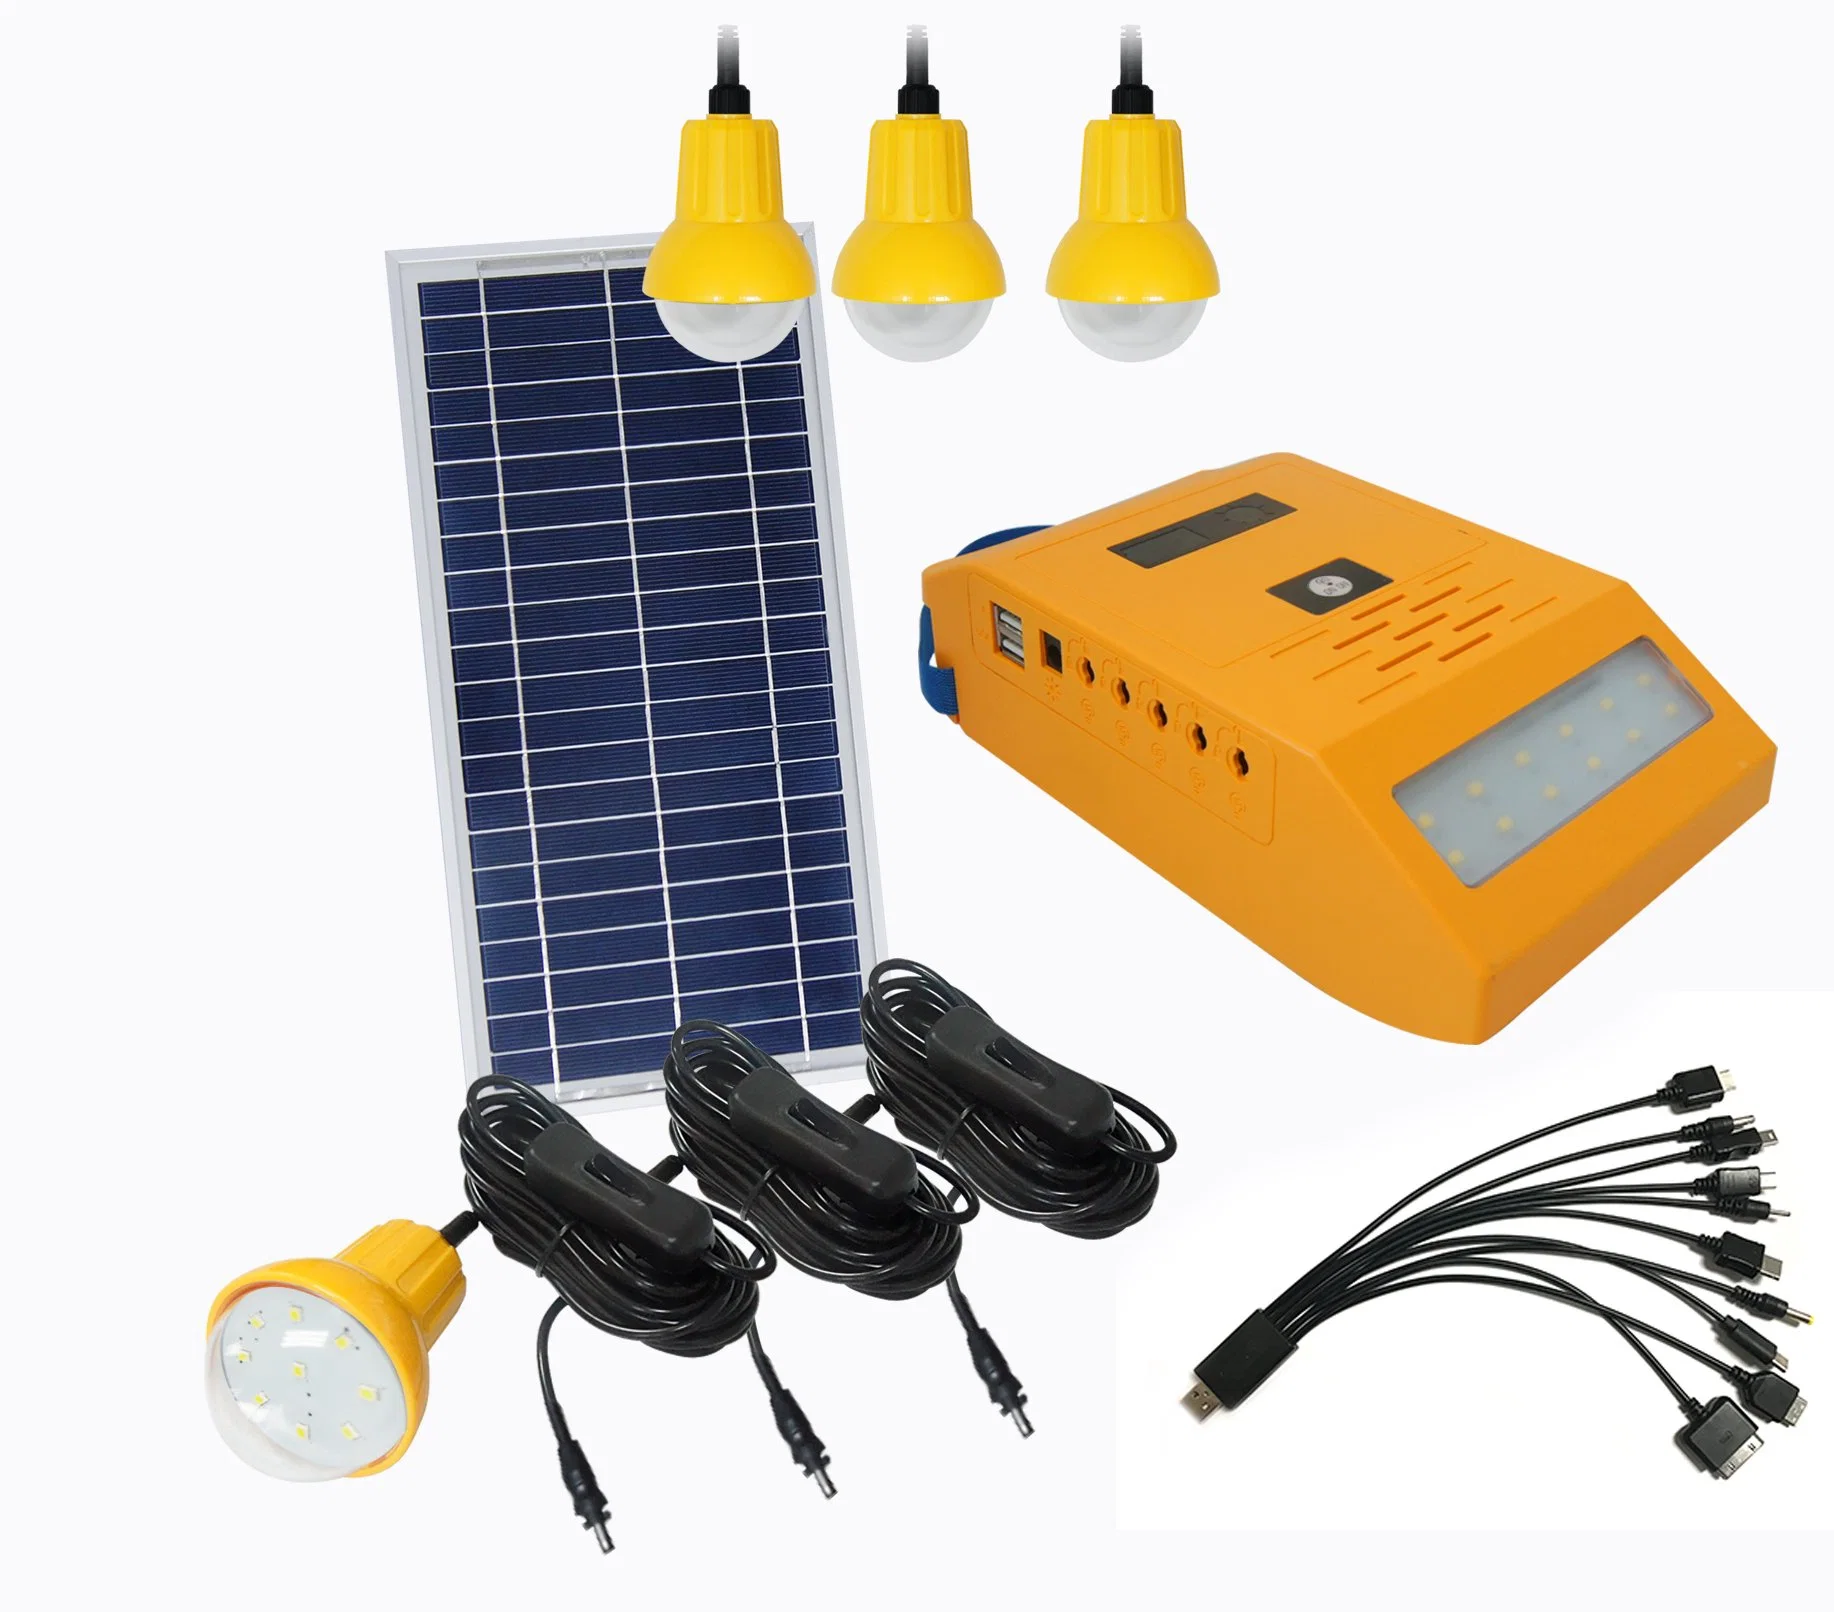 New Energy off-Grid Solar Lighting House Kit with Phone Charger